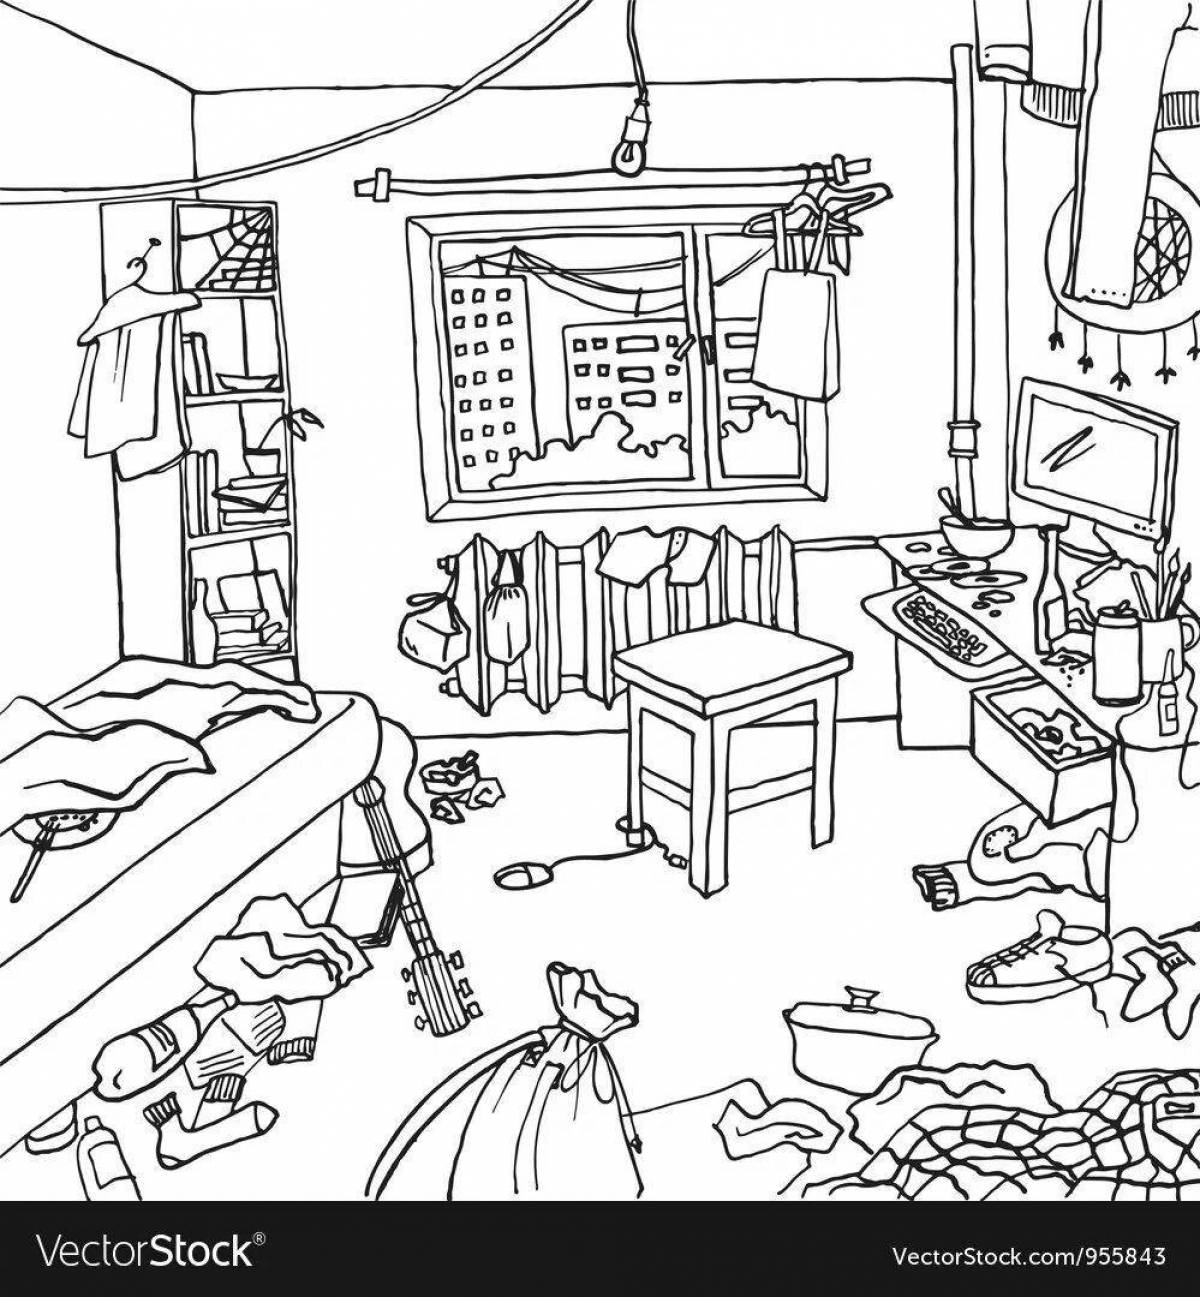 Incredible Room Eater coloring page